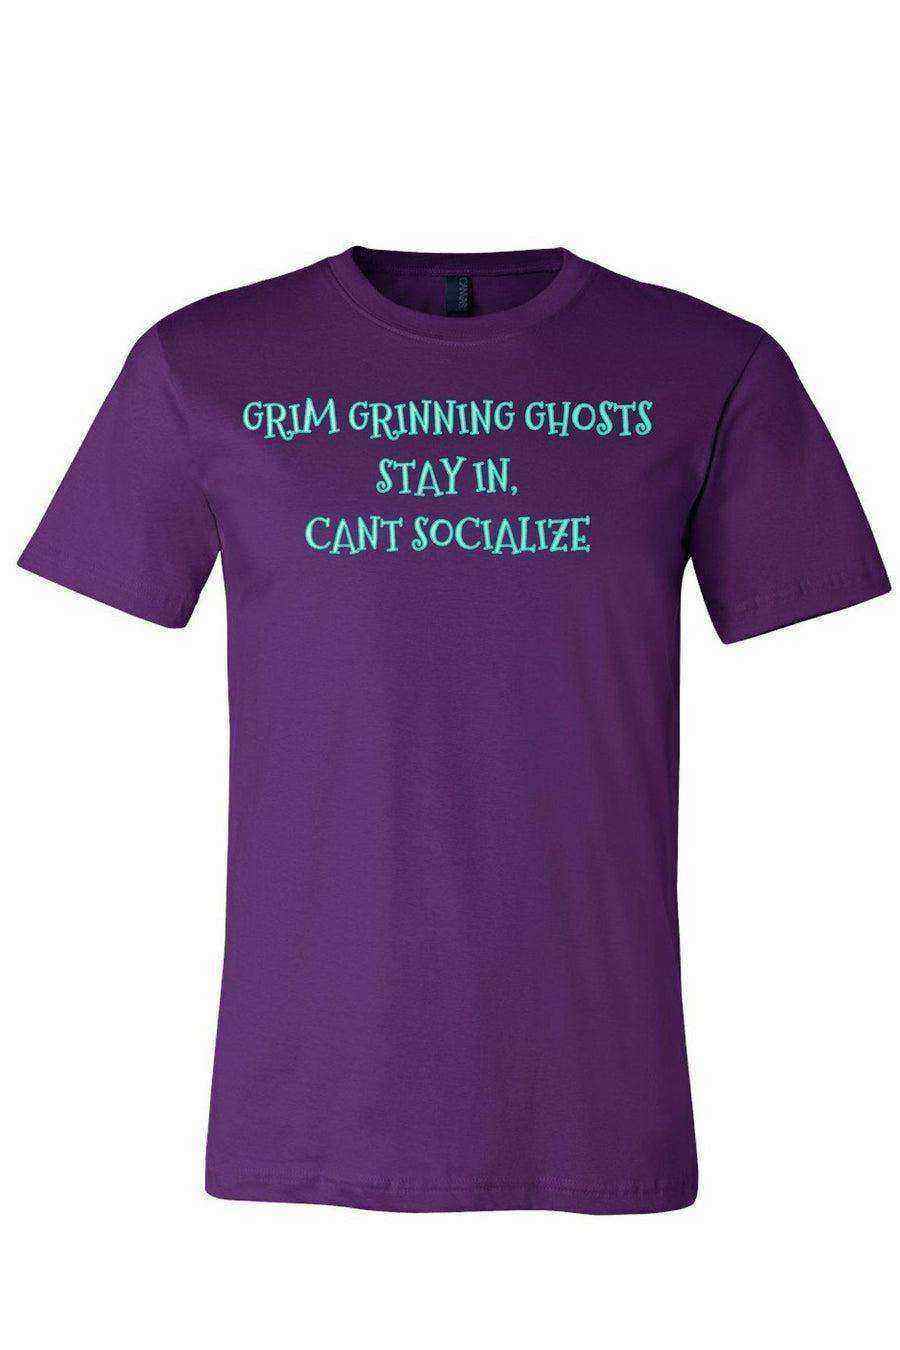 Youth | Grim Grinning Ghosts Stay In Can’t Socialize Shirt | Haunted Mansion | Social Distance - Dylan's Tees